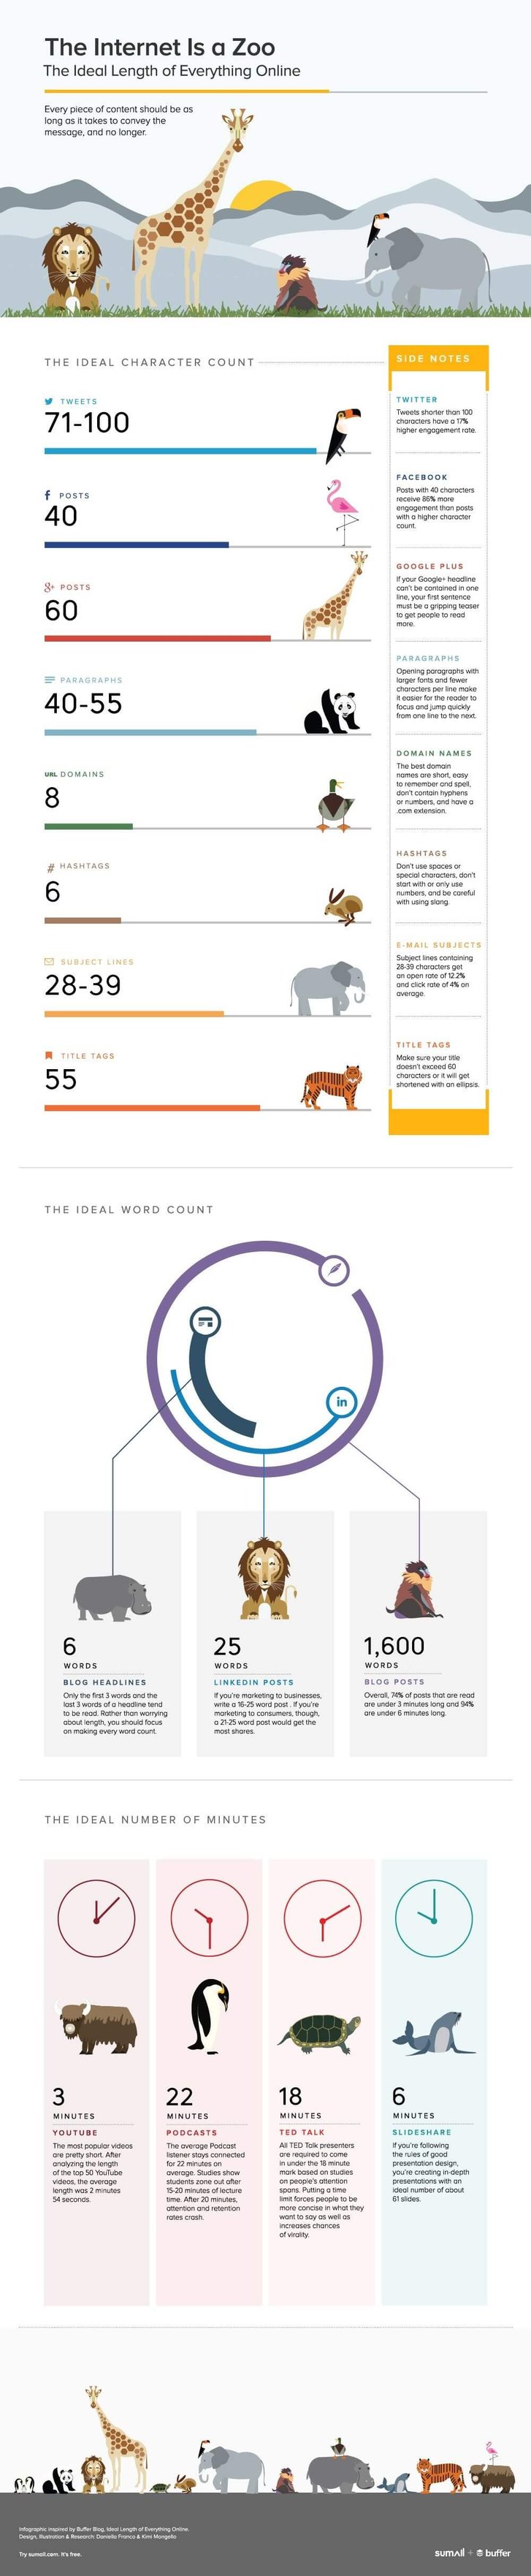 The internet is a zoo infographic